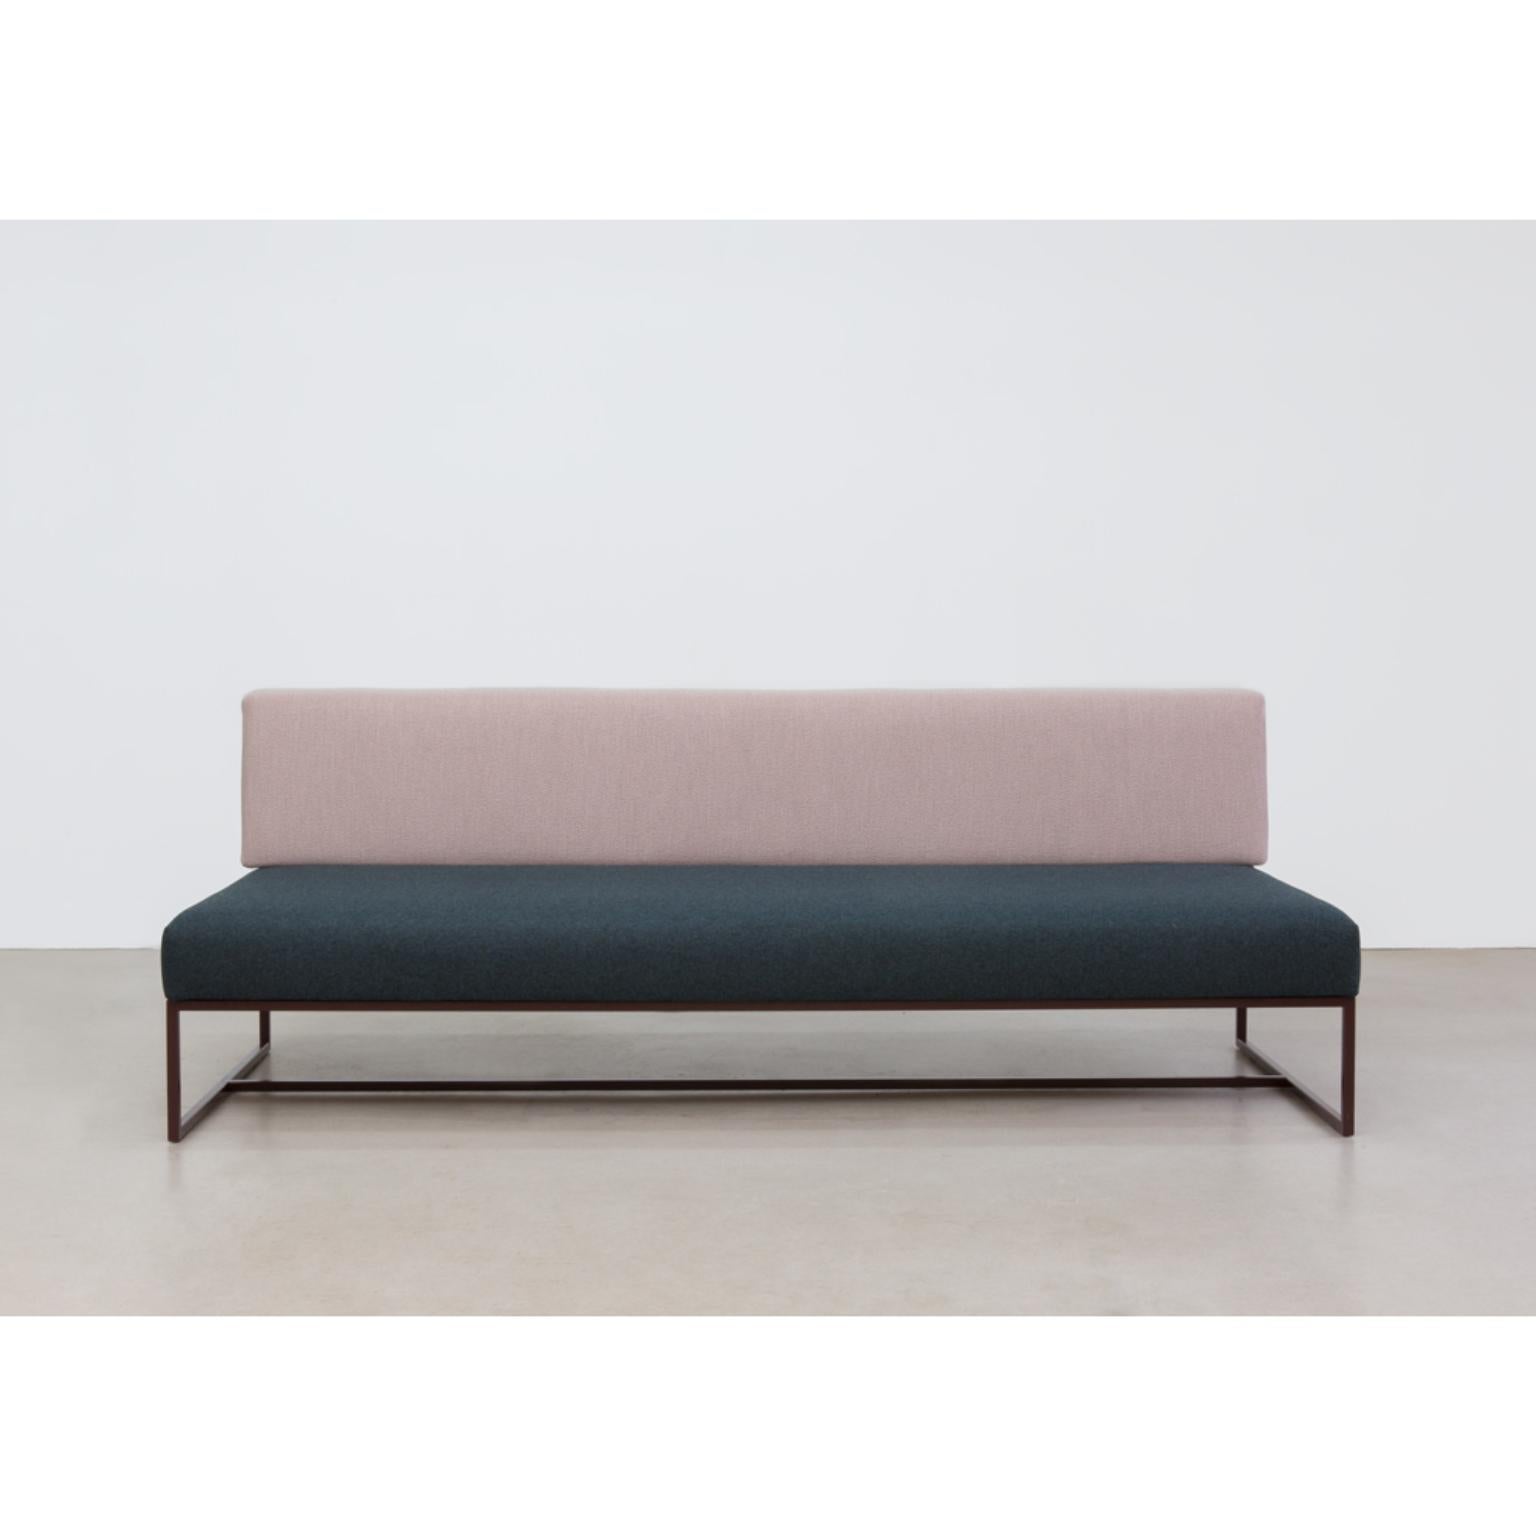 Circus couch by Llot Llov
Dimensions: W 48 x L 210 x H 74 cm
Materials: powder coated steel, fabrics, birch wood


LLOT LLOV produce exclusive furniture and objects for private or corporate clients and also manage interior design projects such